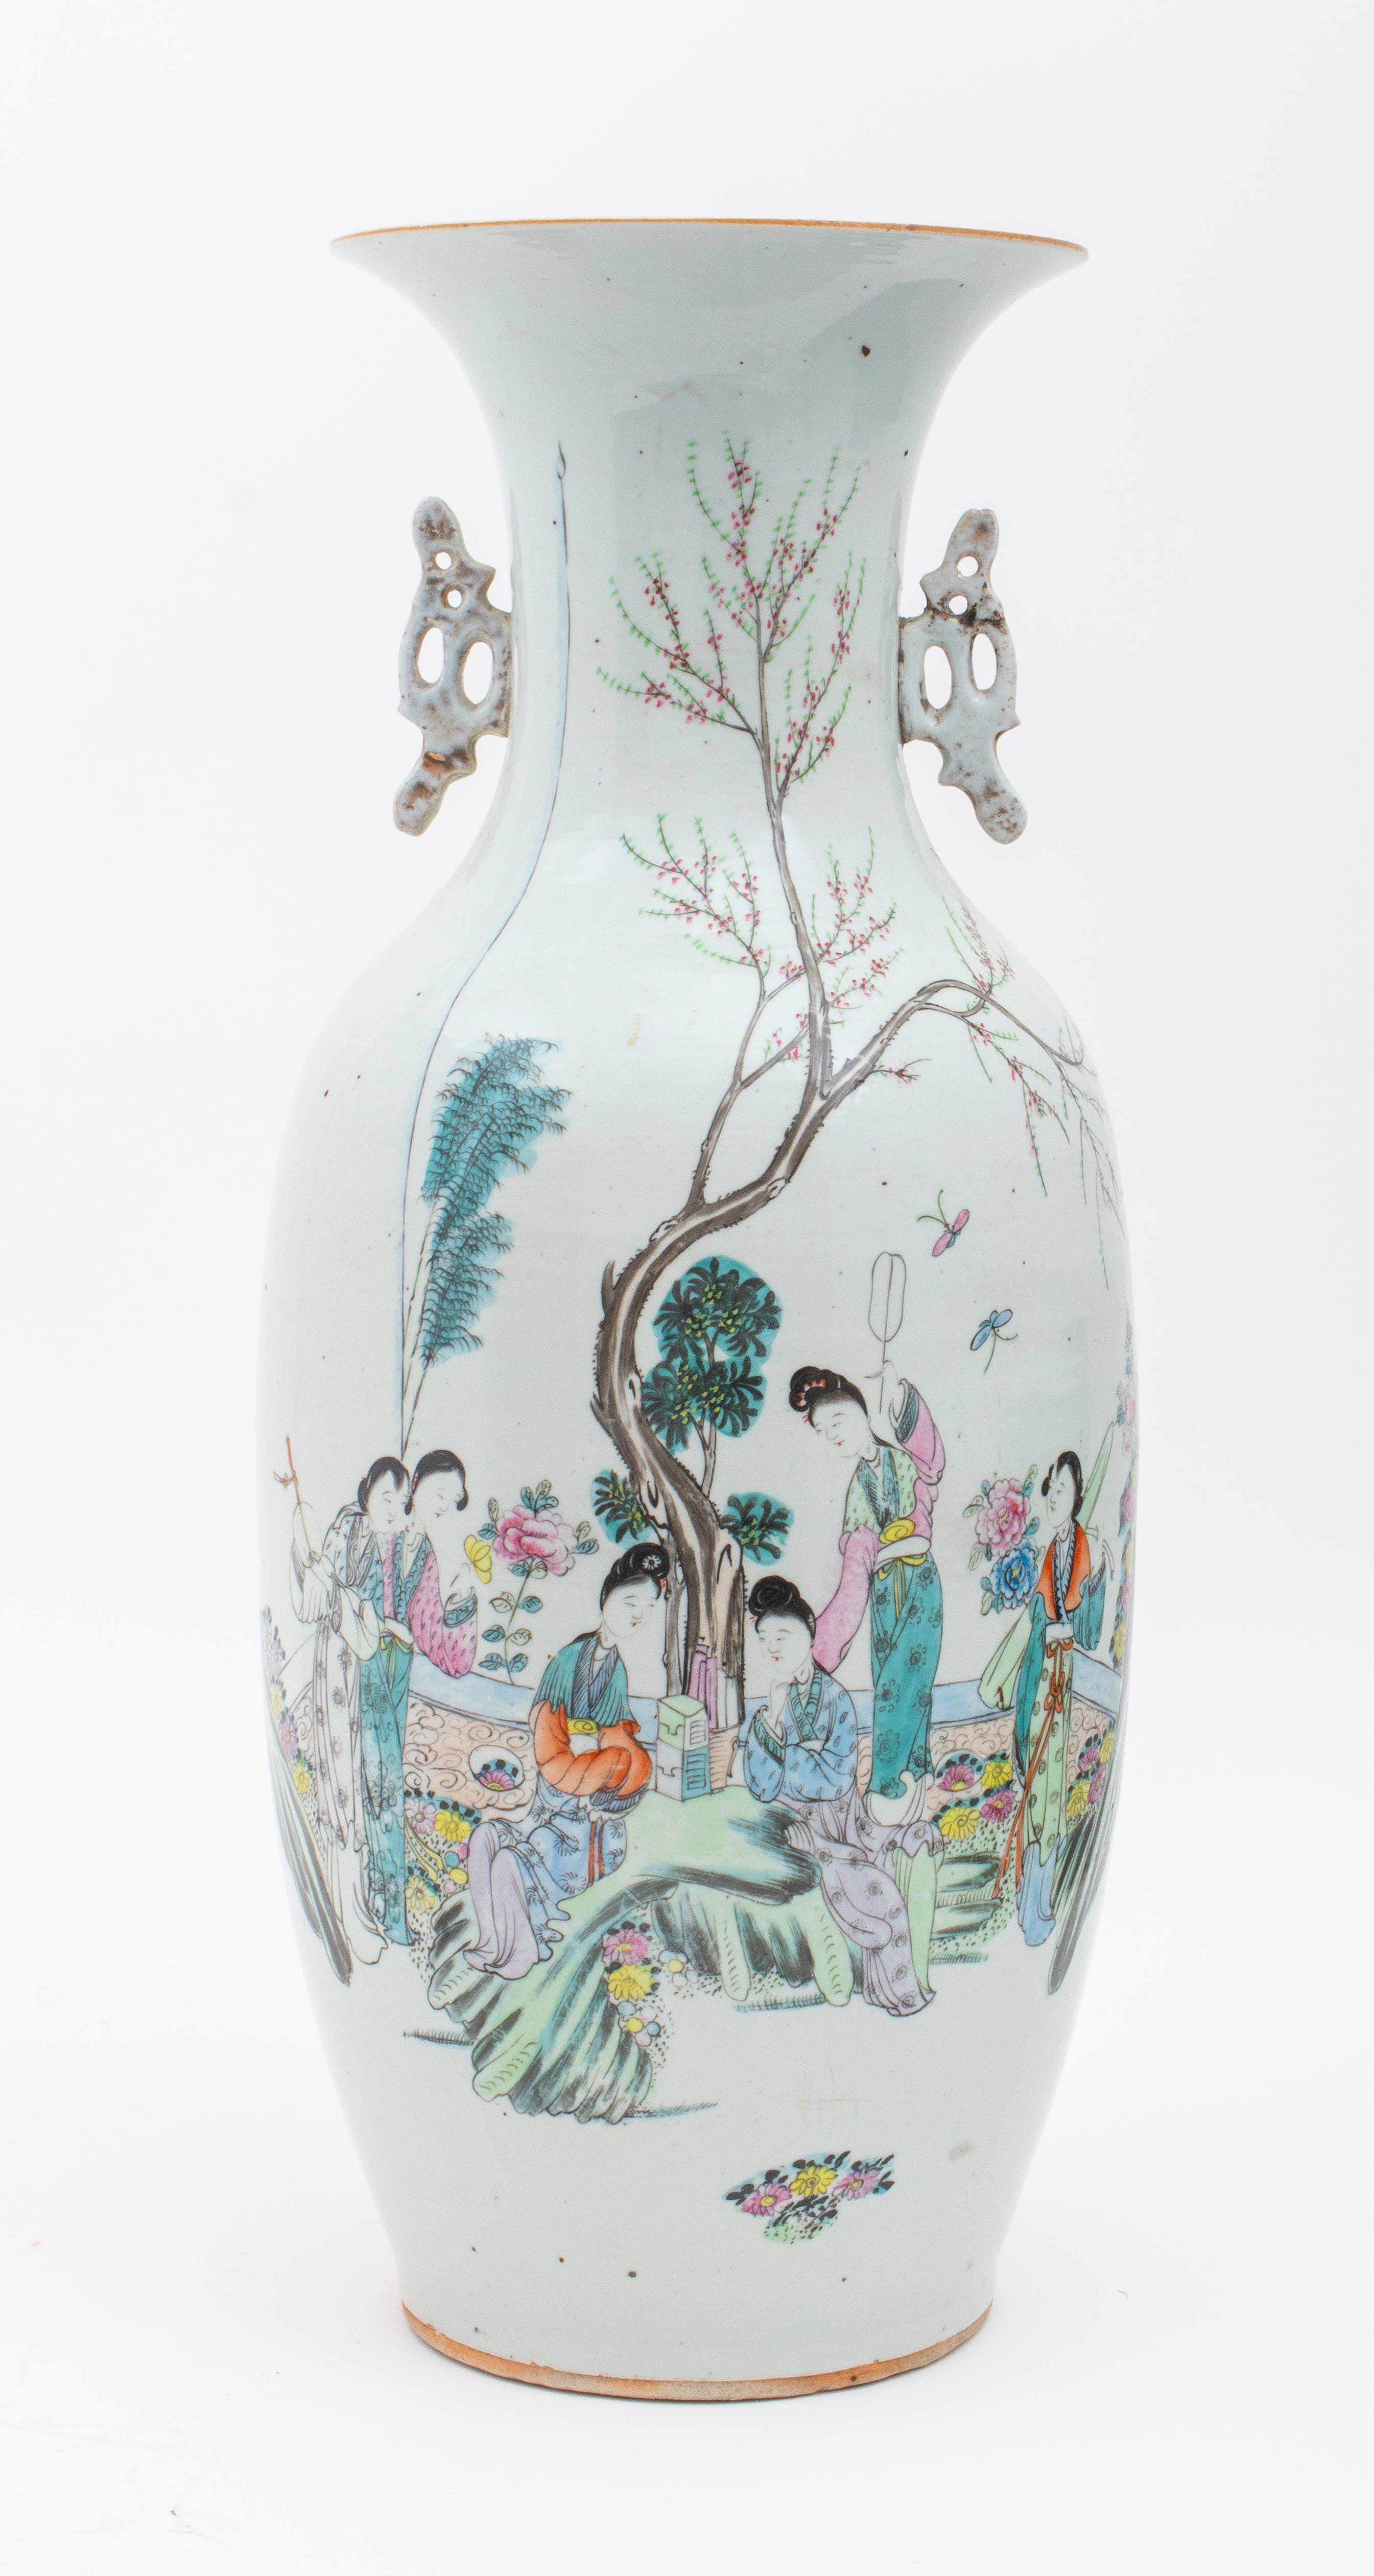 Chinese Famille Rose porcelain baluster vase, depicting a group of court ladies under a cherry blossom tree, with Chinese characters on verso, unmarked. Measure: 22.75